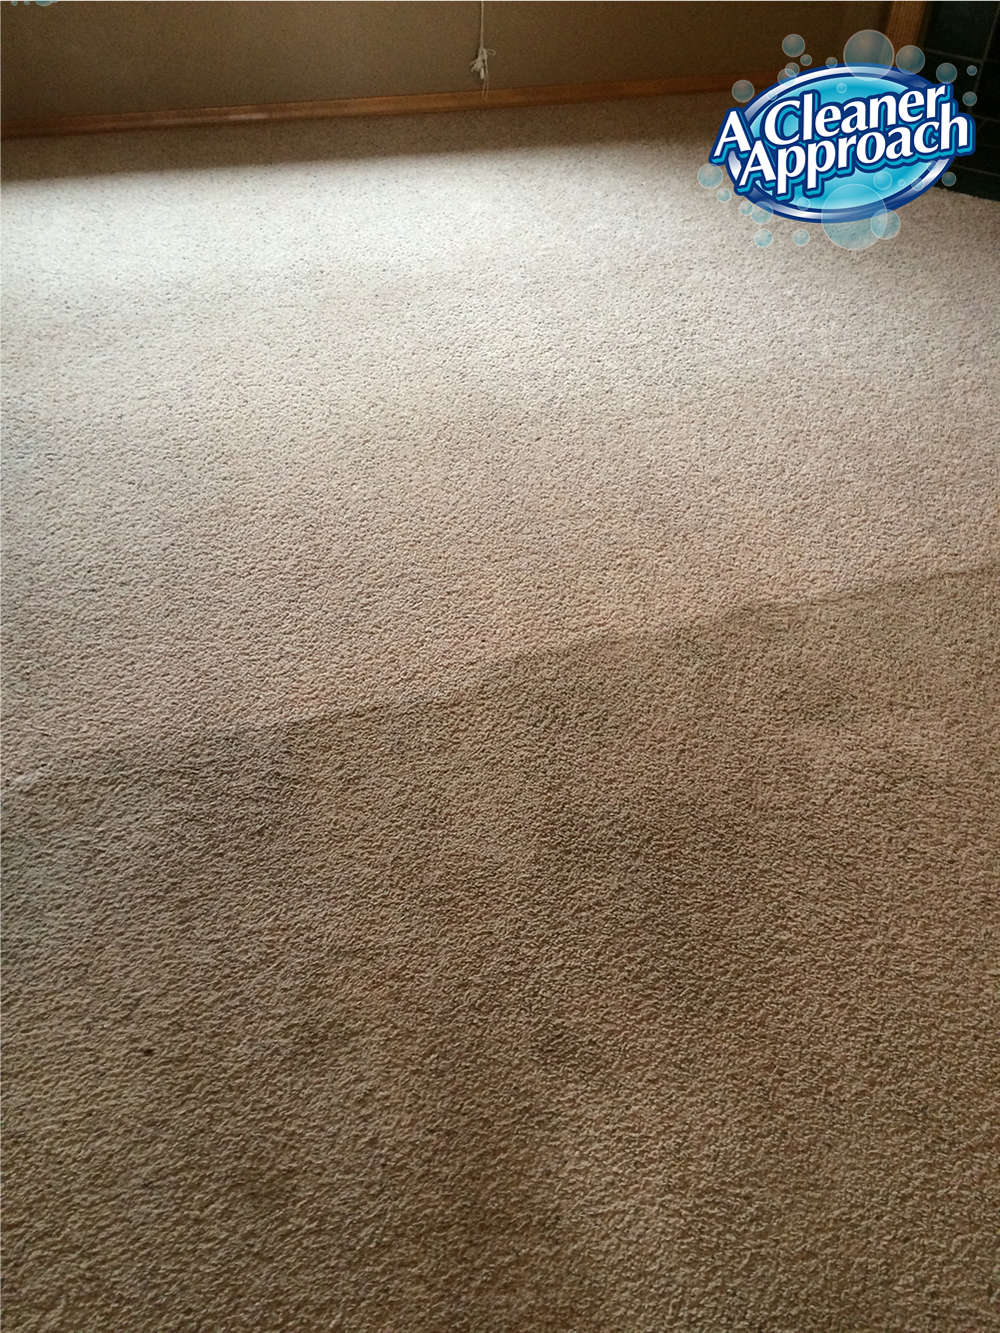 Carpet Cleaning example 1